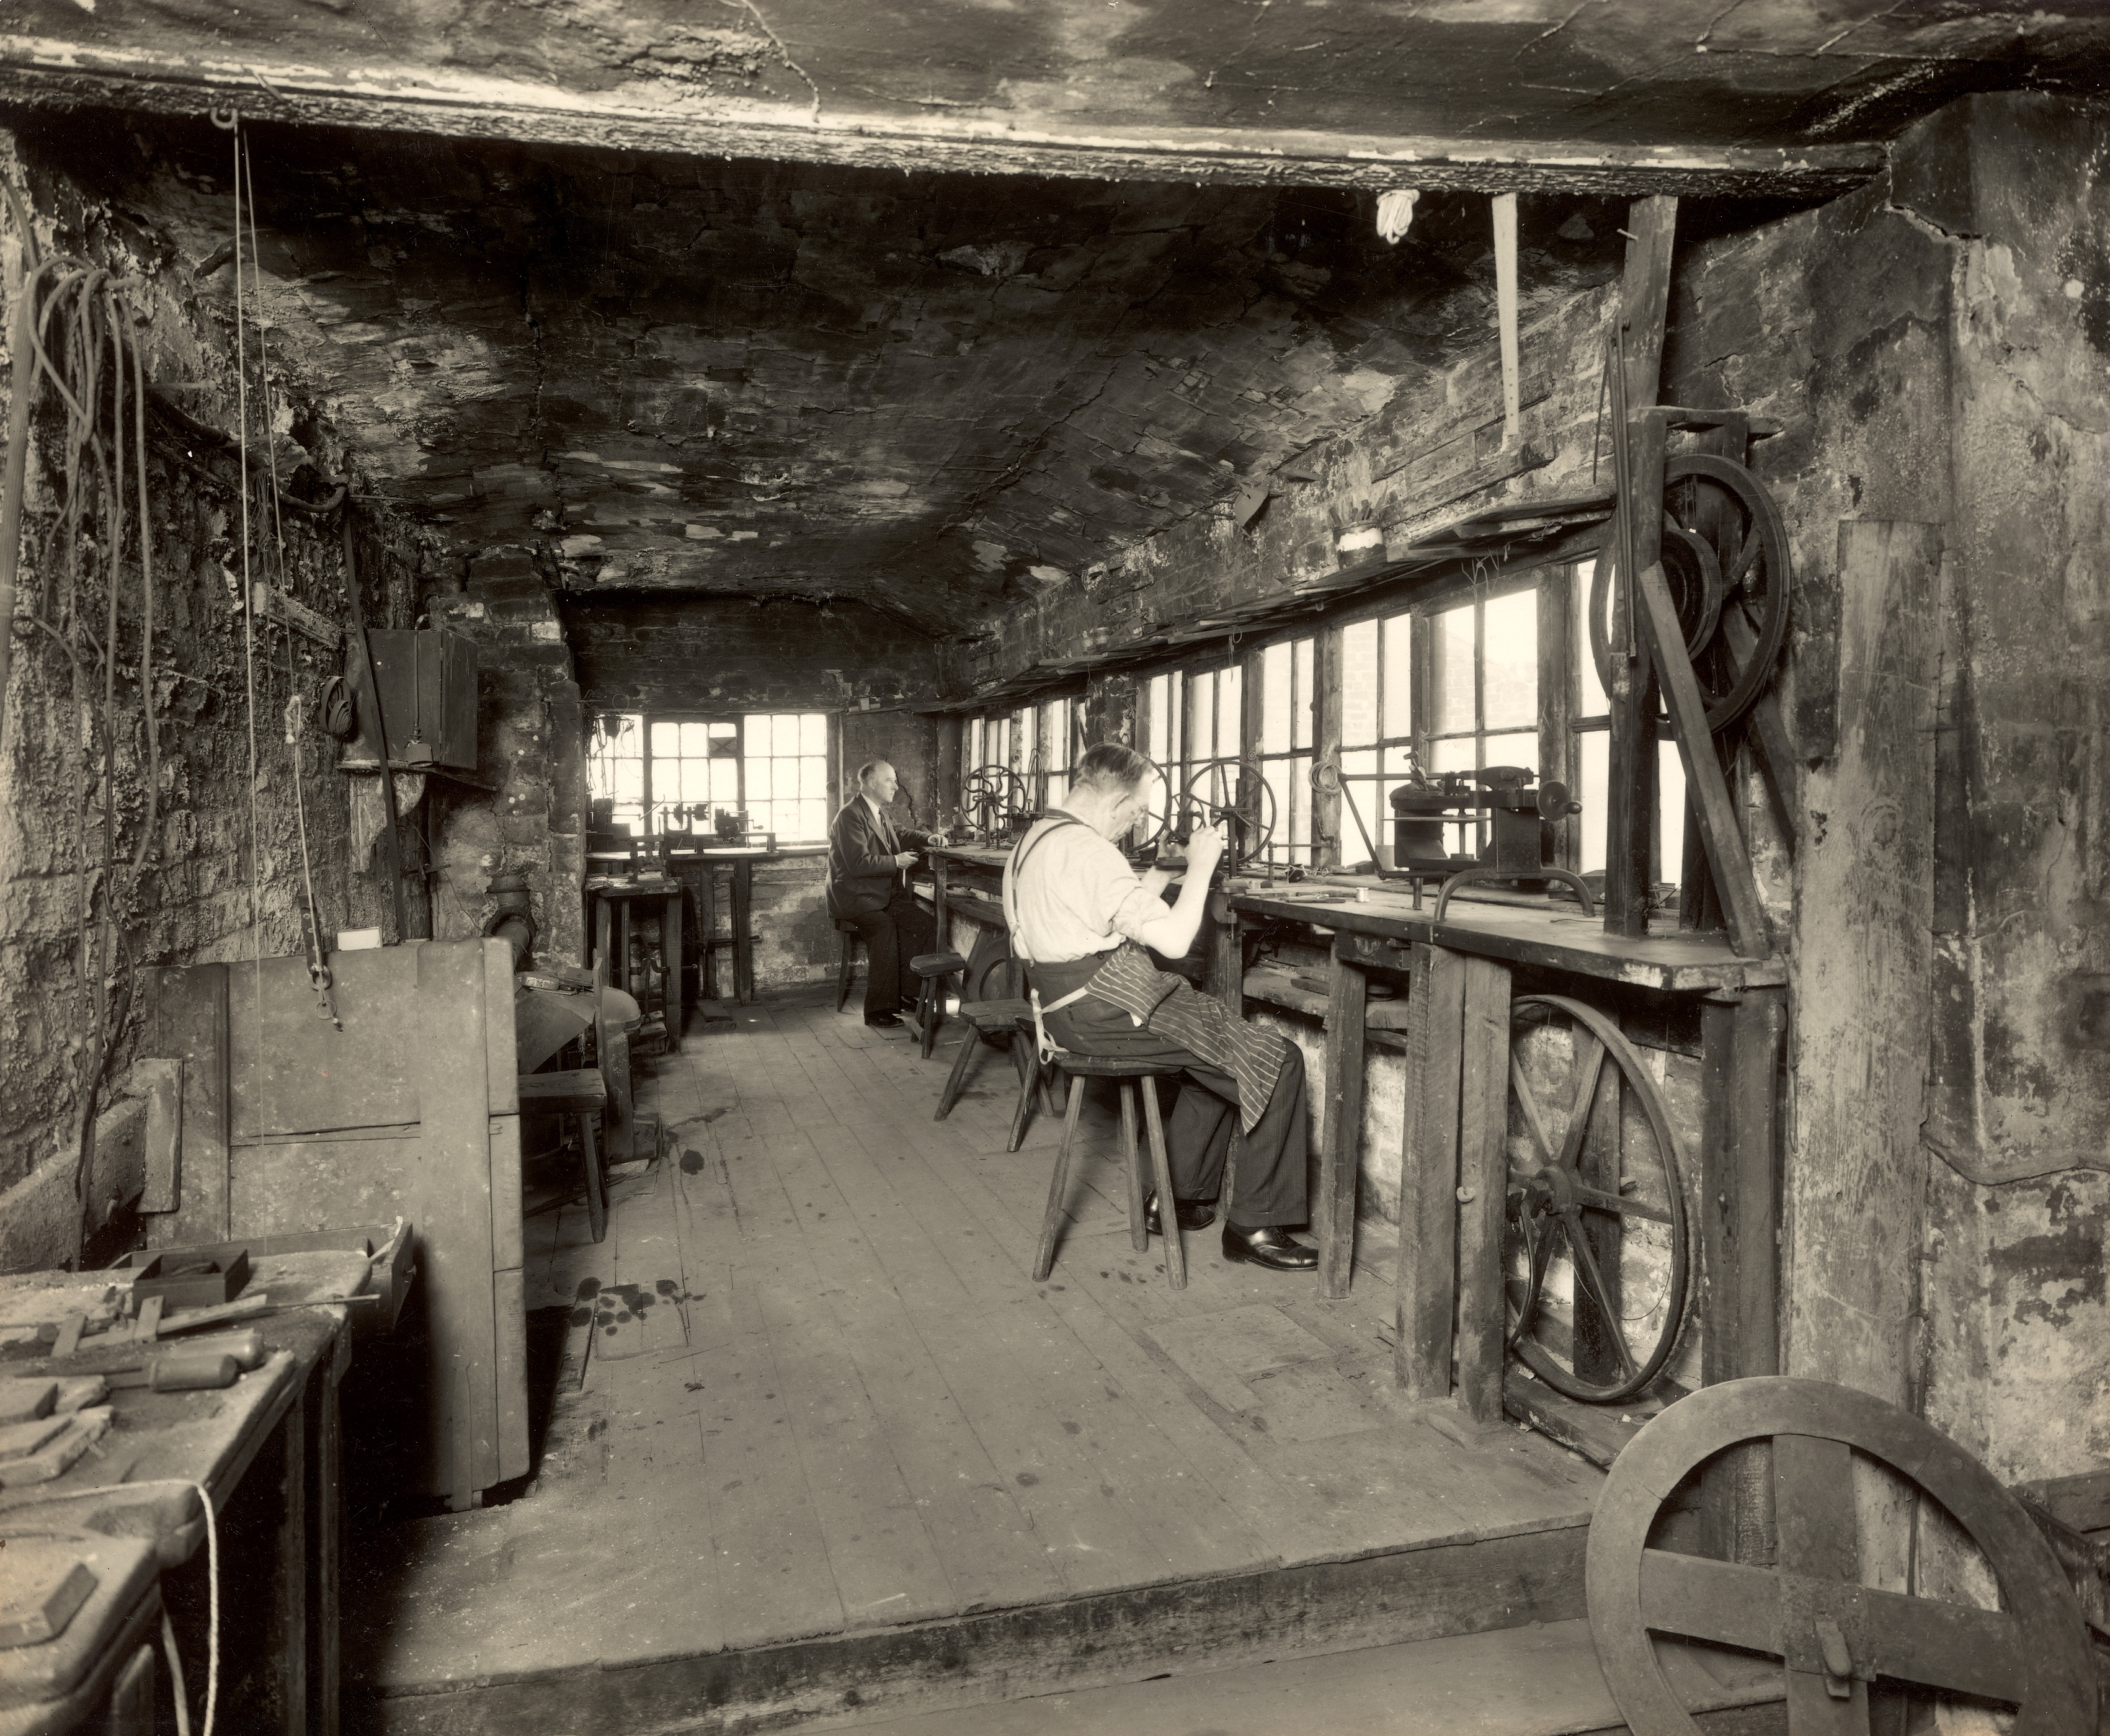 Interior of Joseph Preston's workshop, Eccleston Street, Prescot, 1953. Joseph Preston & Son manufactured watch and marine chronometer movements in these rooms from 1829 until about 1950. Much of the equipment was removed from the shop prior to 1953. Image: Prescot Museum.